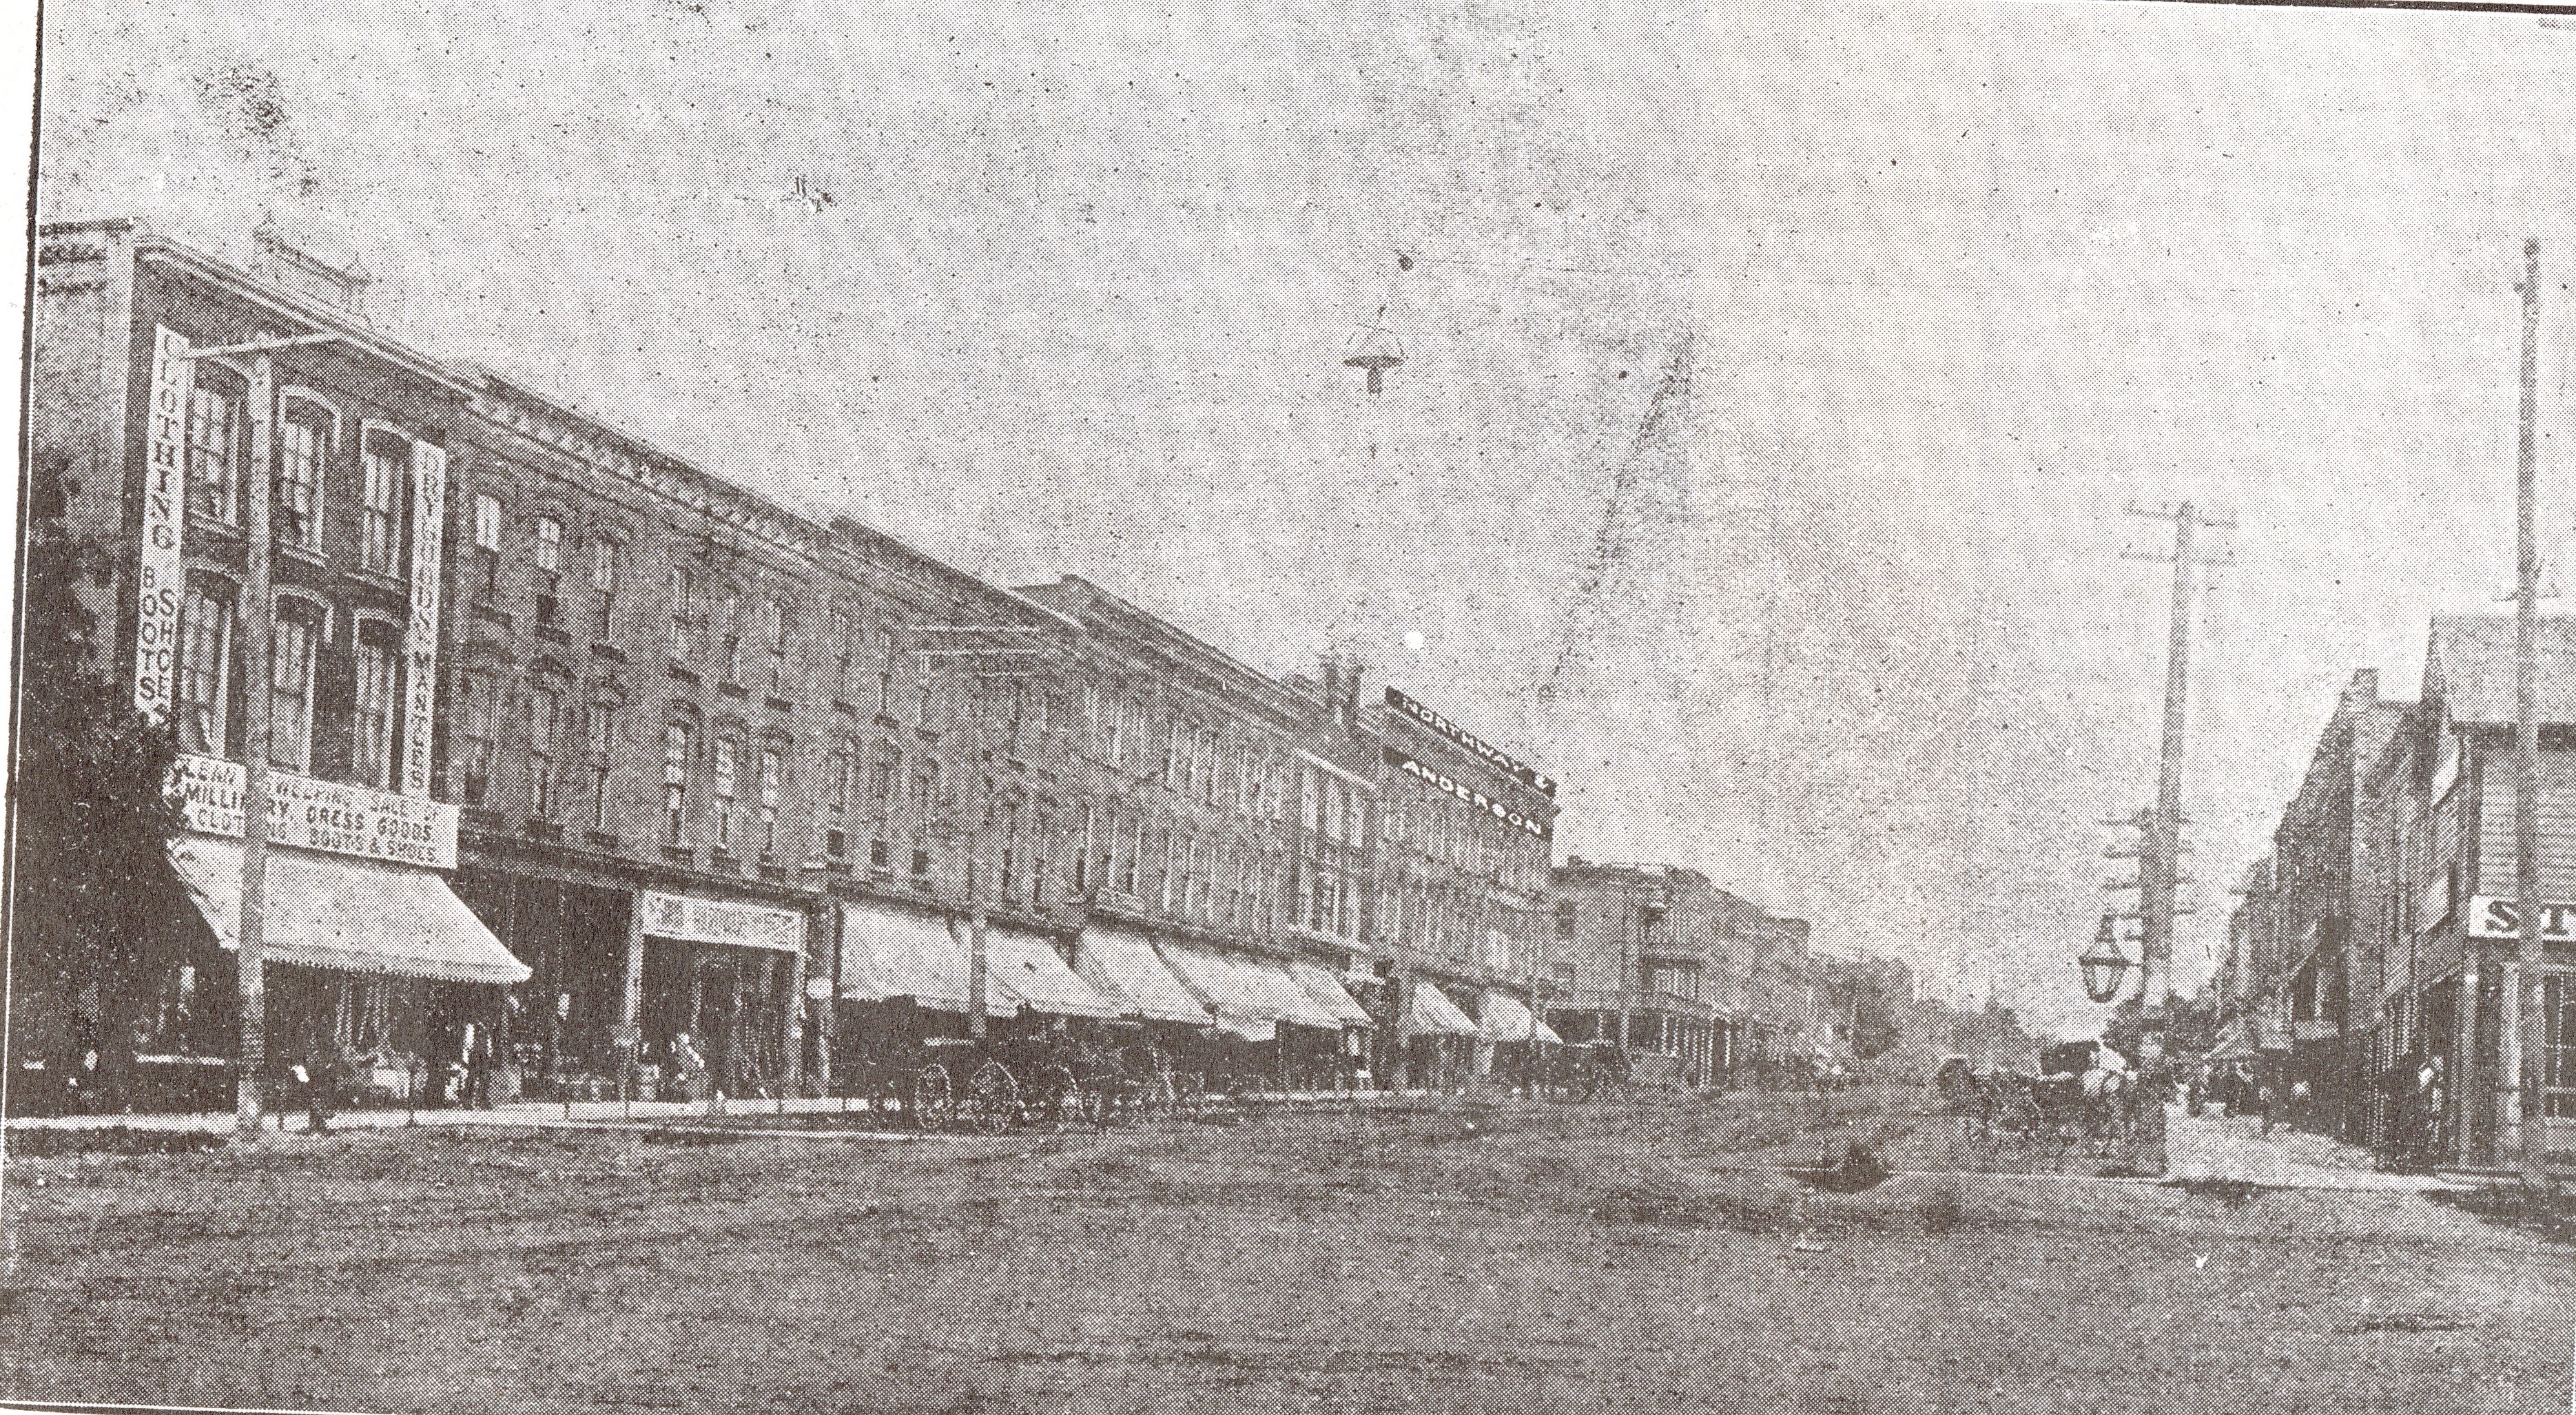 A black and white photograph of Tillsonburg's main street Broadway. The street is dirt and lined with various buildings and businesses on either side. Horse drawn wagons and carriages are parked outside the buildings. Telephone poles also line the street. 